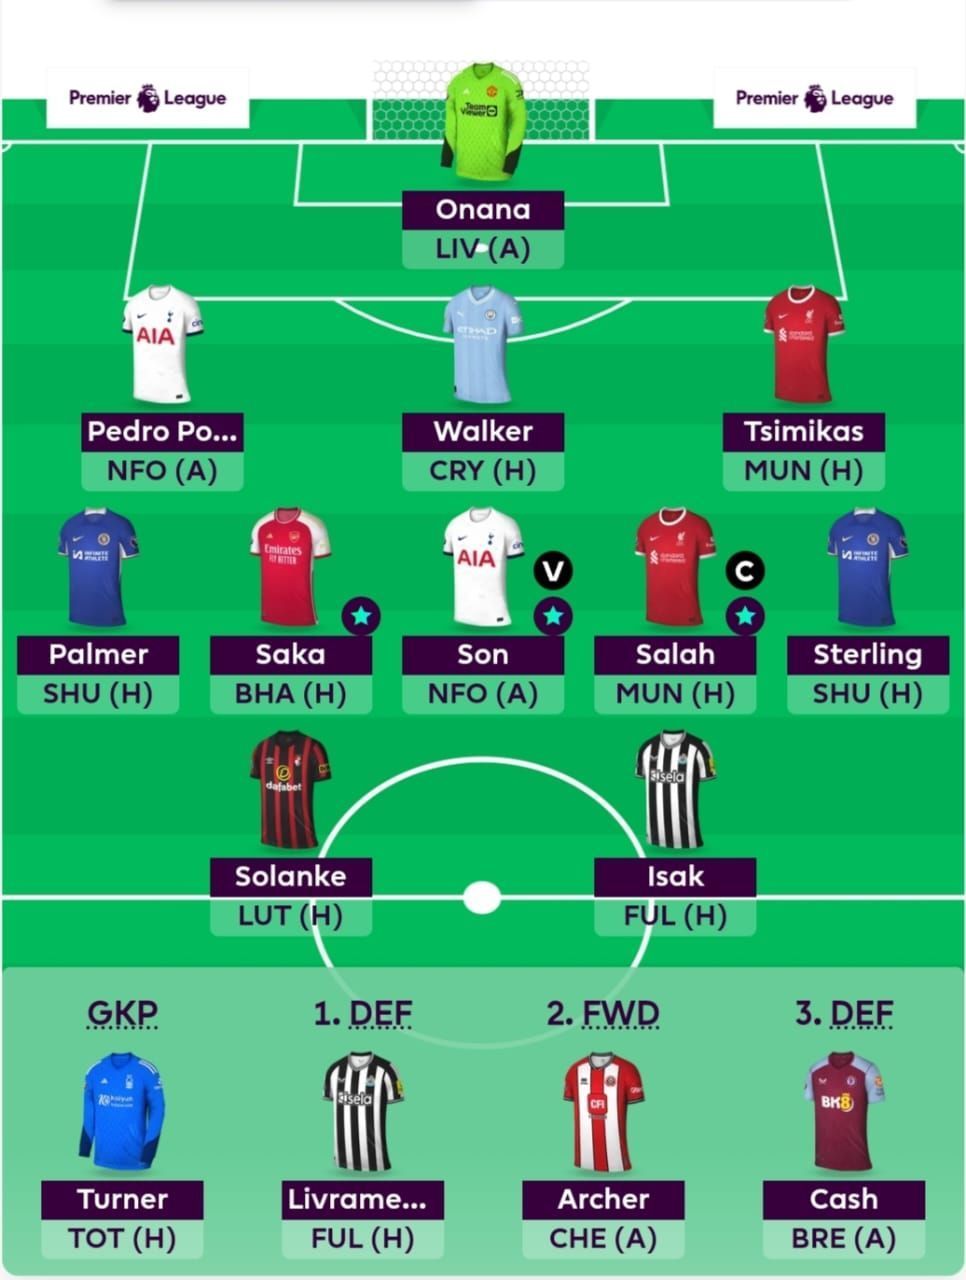 GW 17 Suggested FPL Team | FPL 23/24 Tips